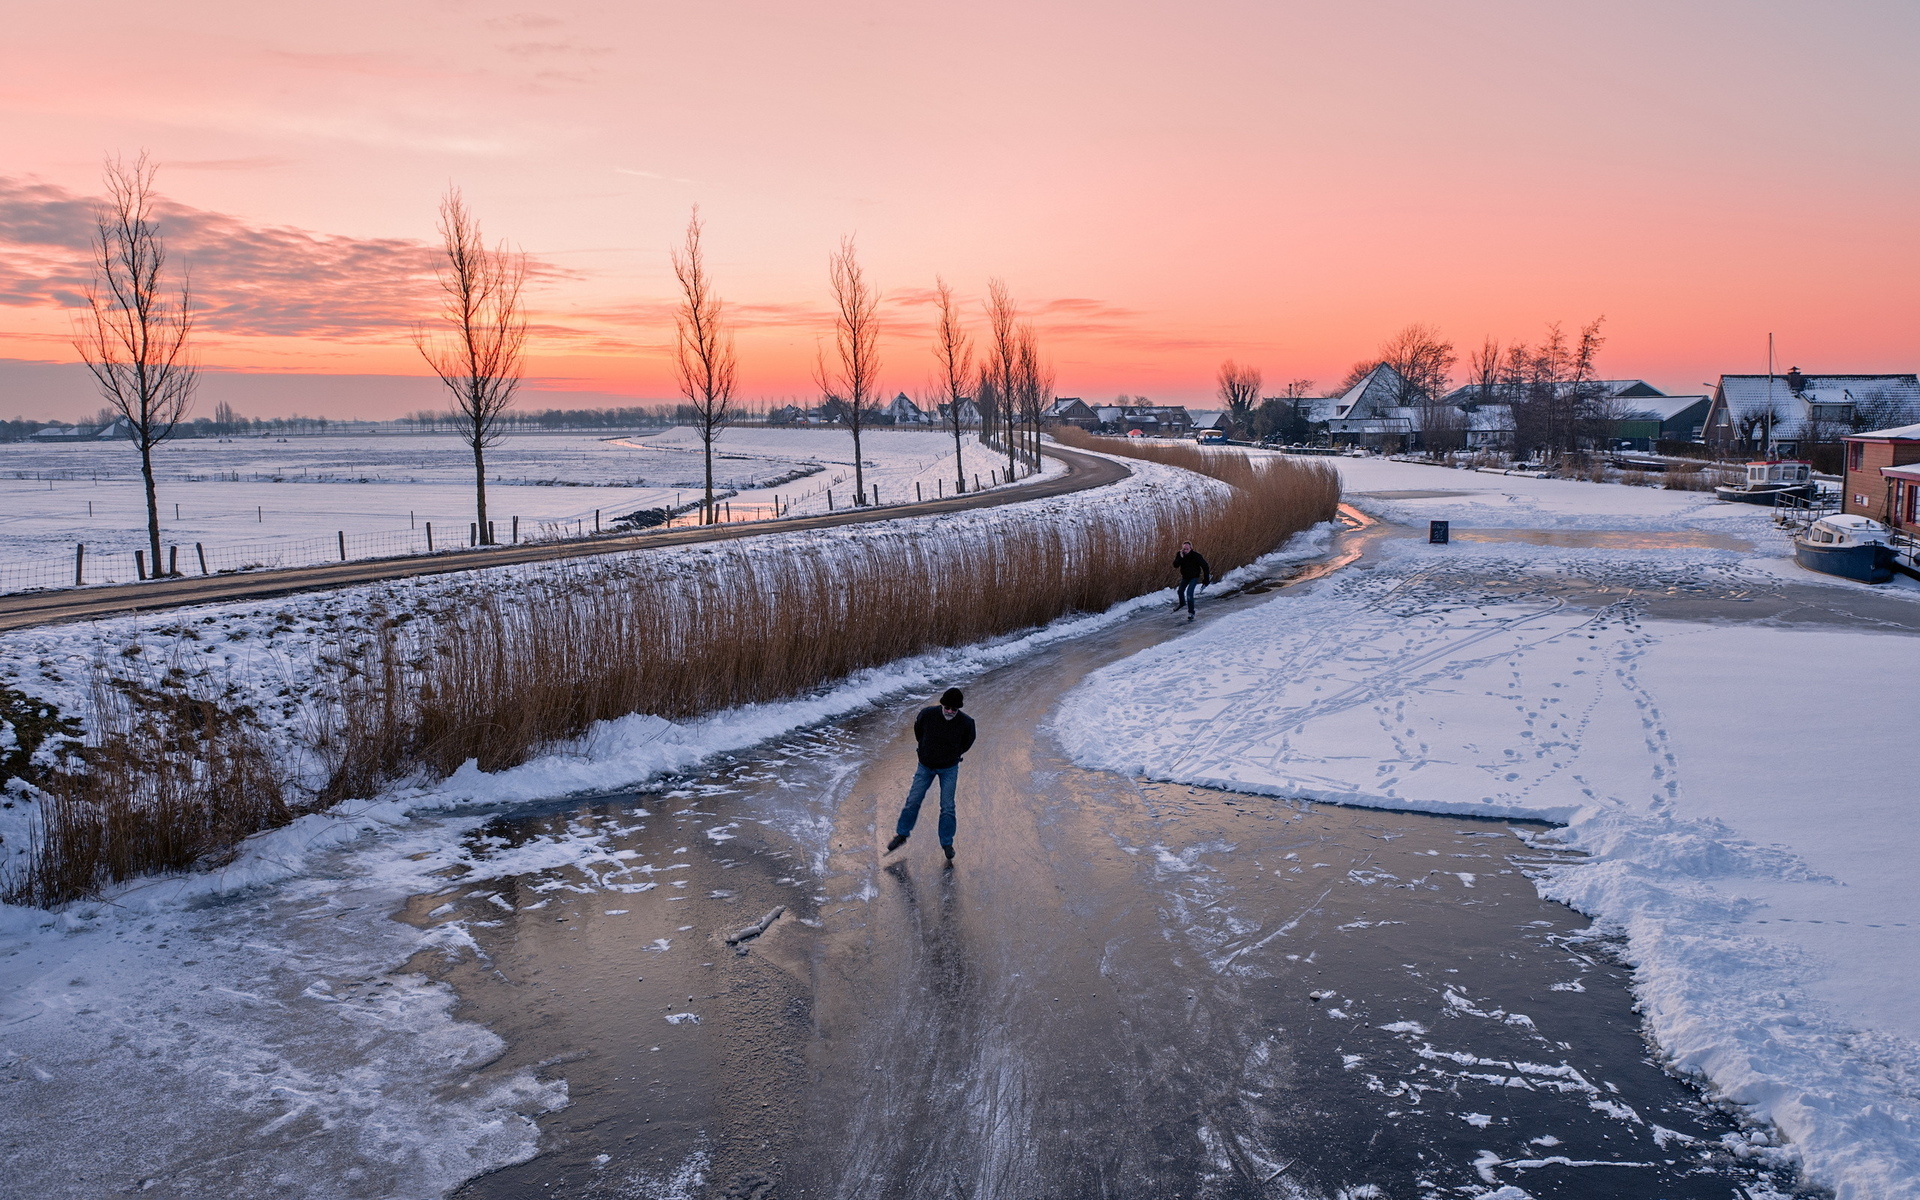 sunset, Ice, Home, Winter, Road, Buildings, Houses, People, Sports, Sky, Rivers Wallpaper